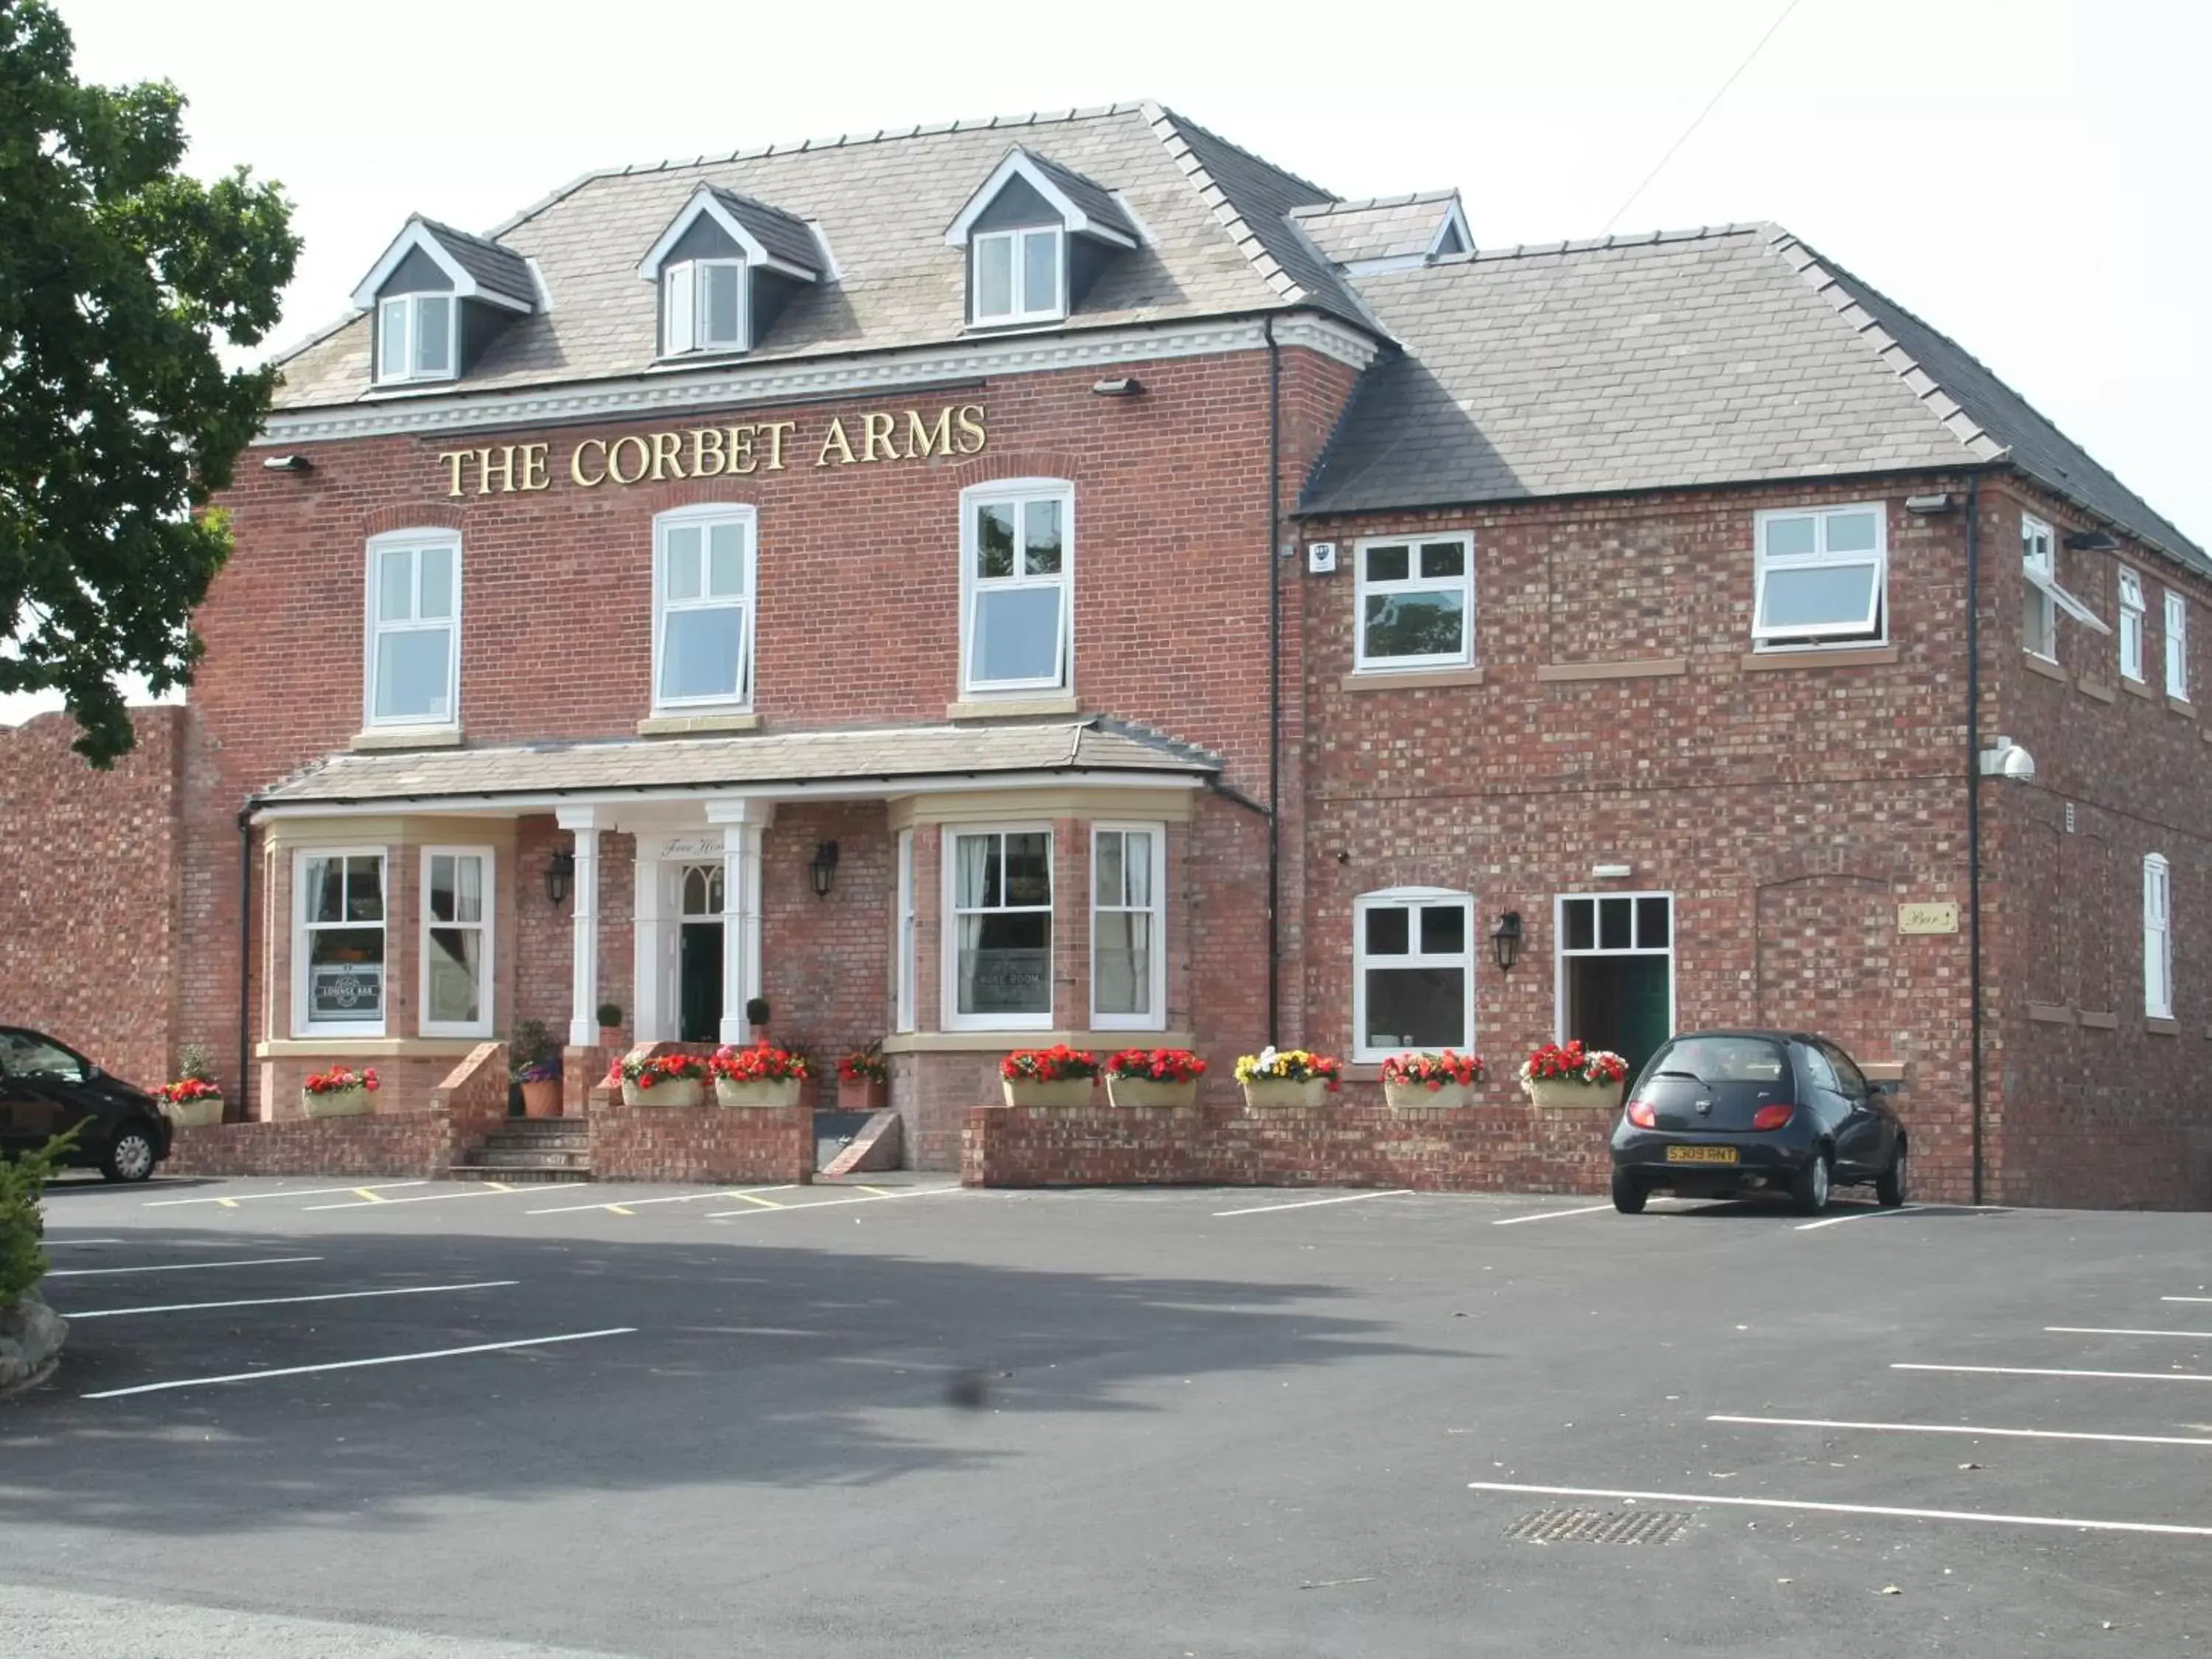 Property building in The Corbet Arms